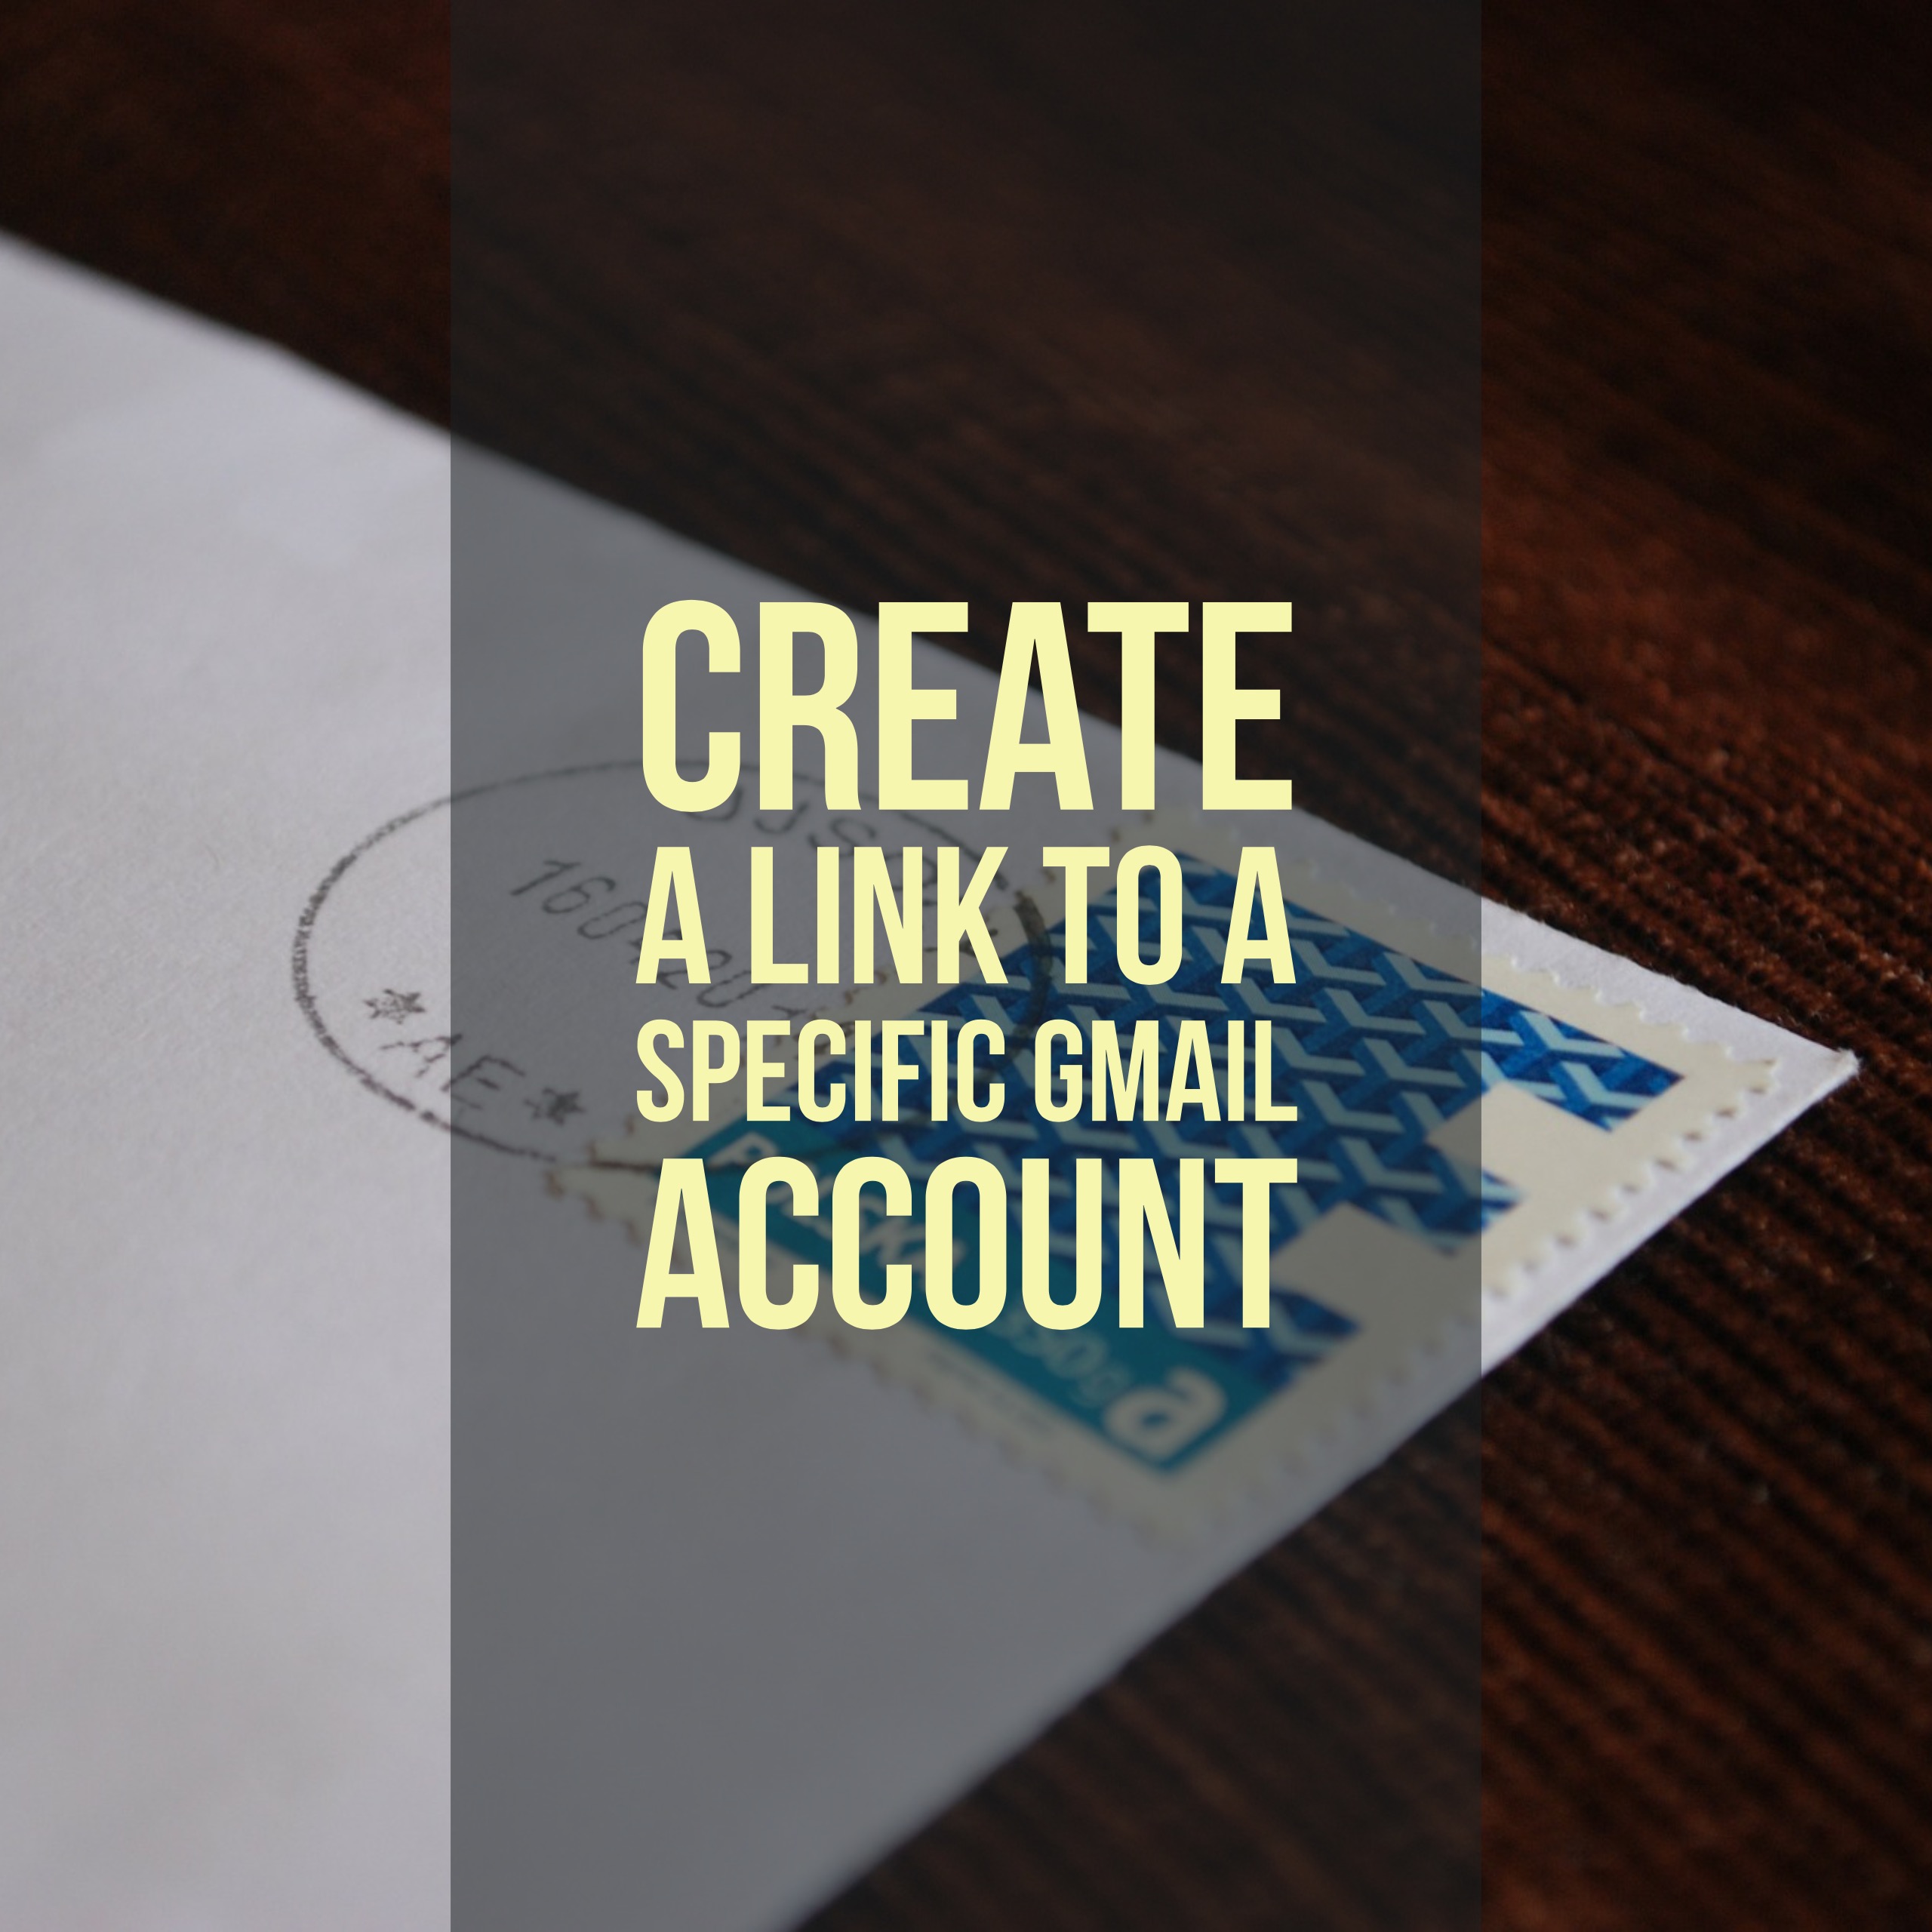 Create a link to a specific Gmail account